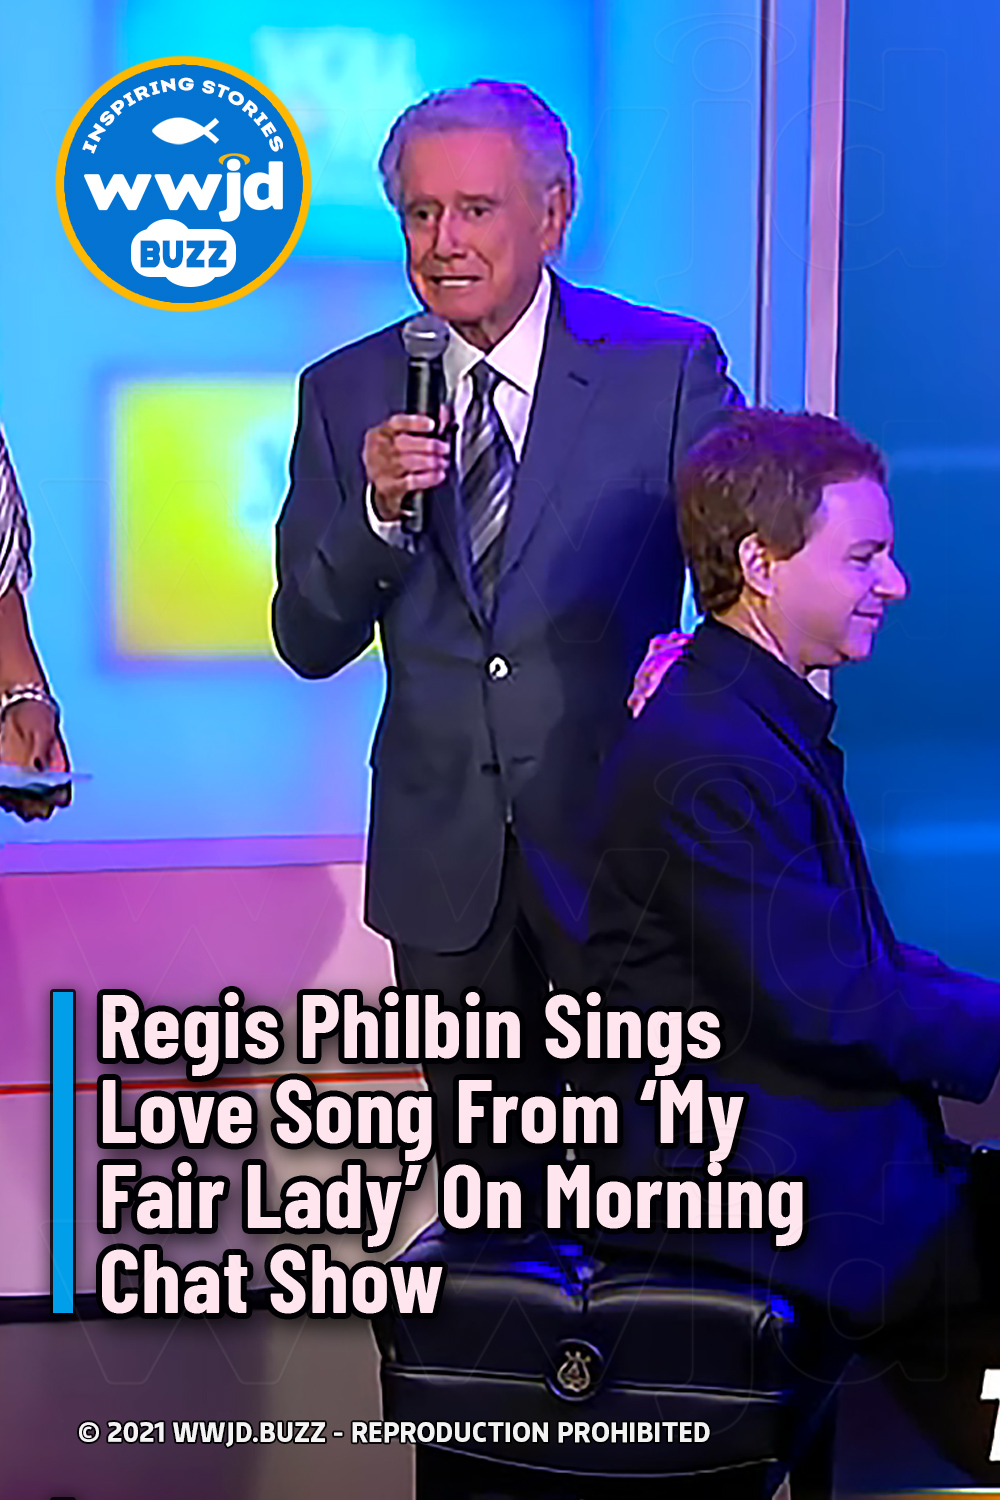 Regis Philbin Sings Love Song From ‘My Fair Lady’ On Morning Chat Show